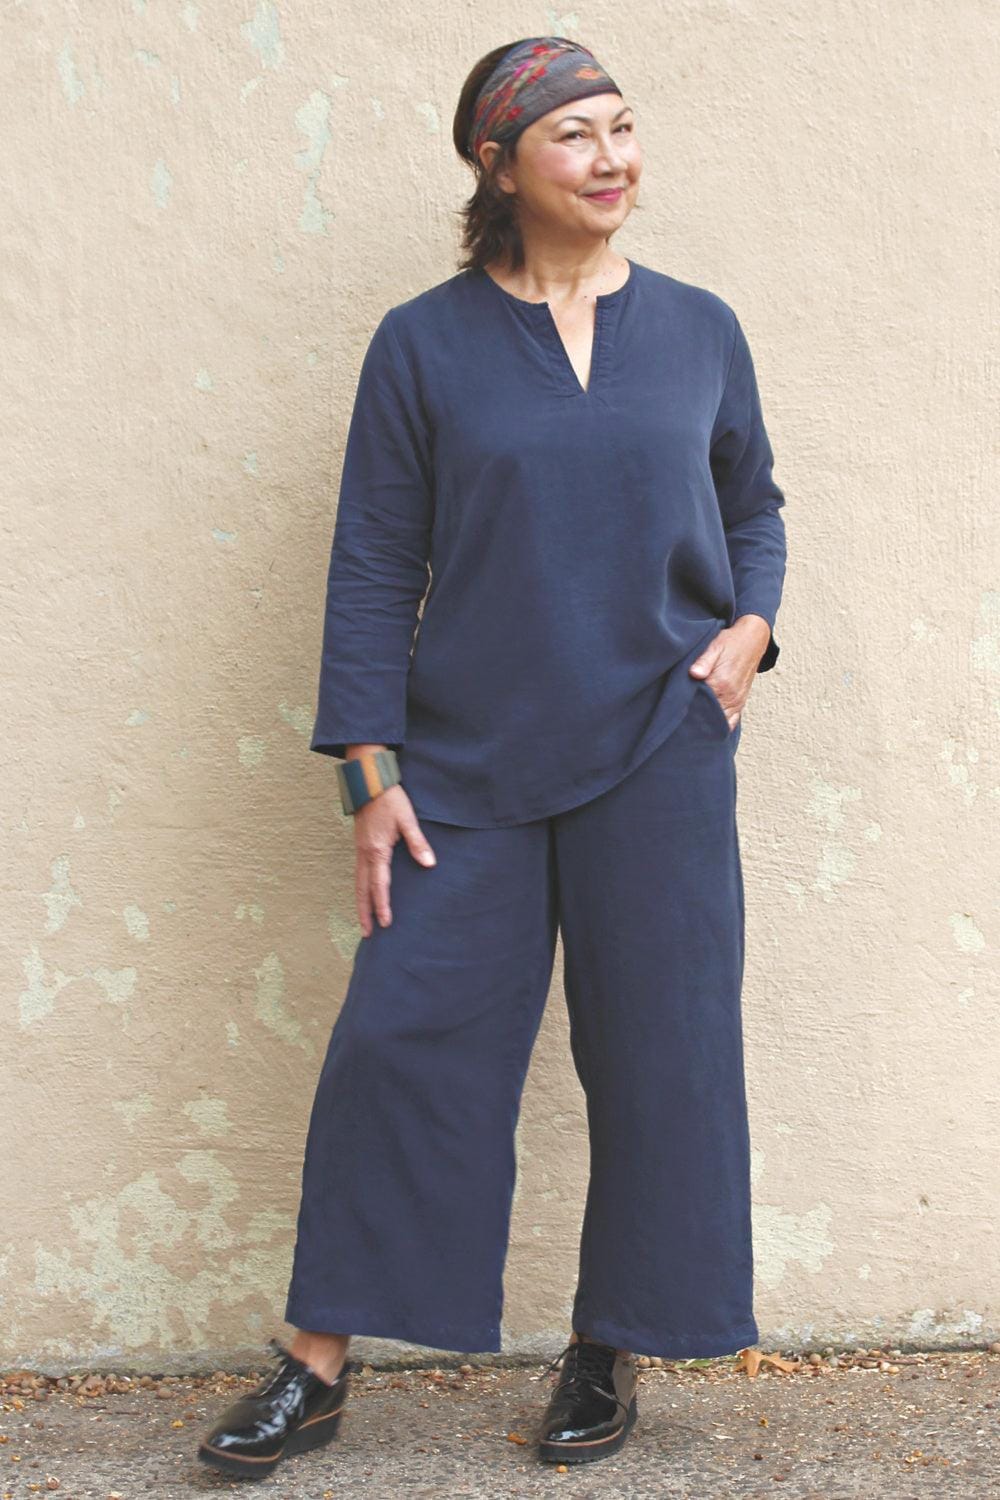 Crop Tencel Full Cut Pant with 2 side pockets being worn with a matching split neck long sleeve top. The model is smiling and wearing a hair band and black front tie shoes.